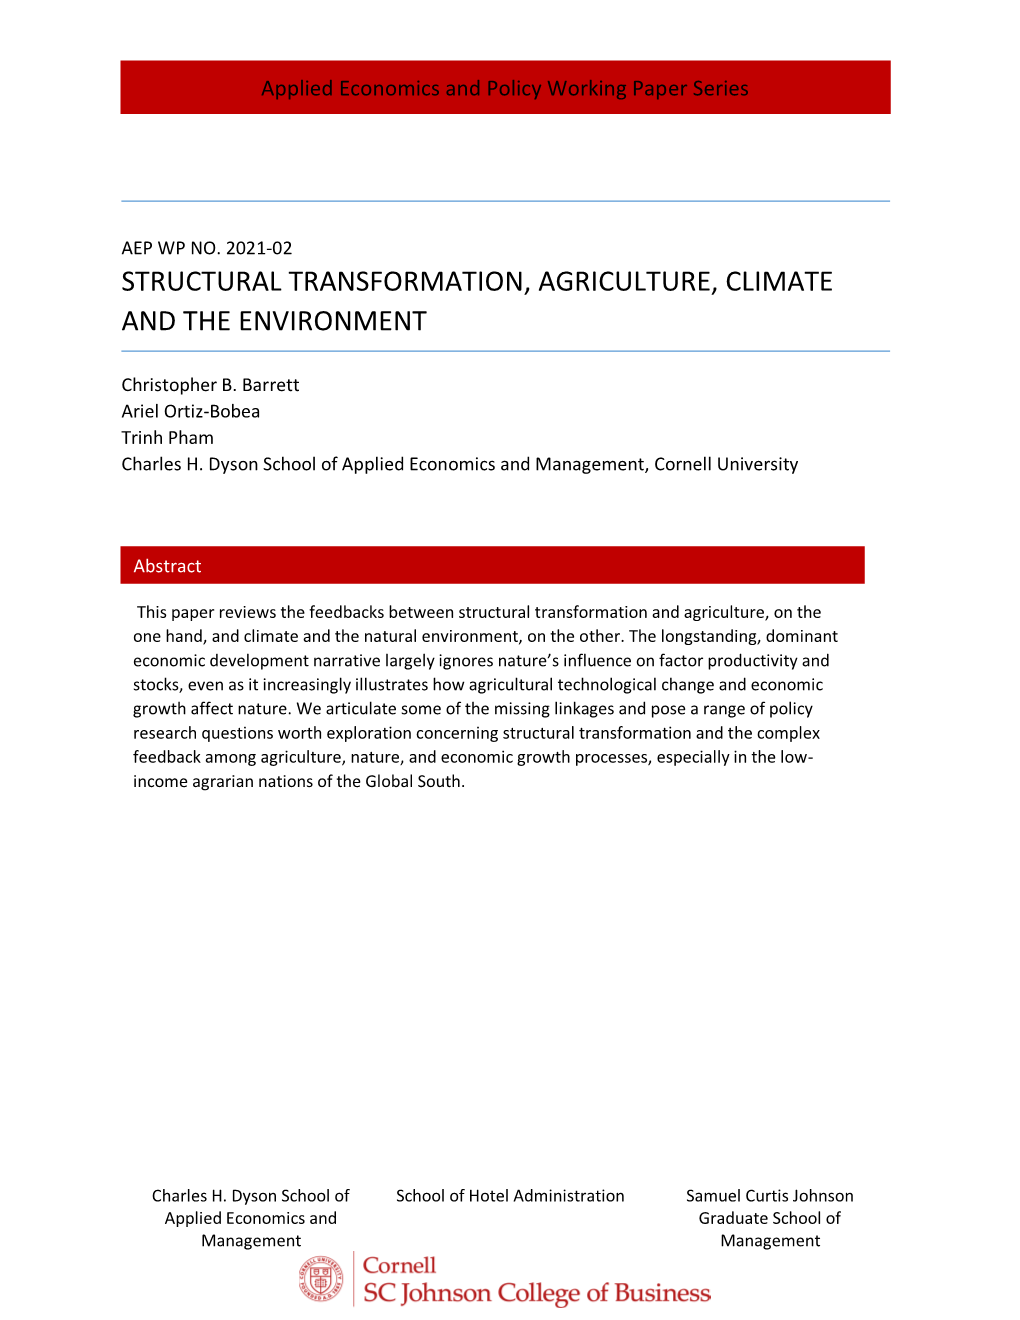 Structural Transformation, Agriculture, Climate and the Environment